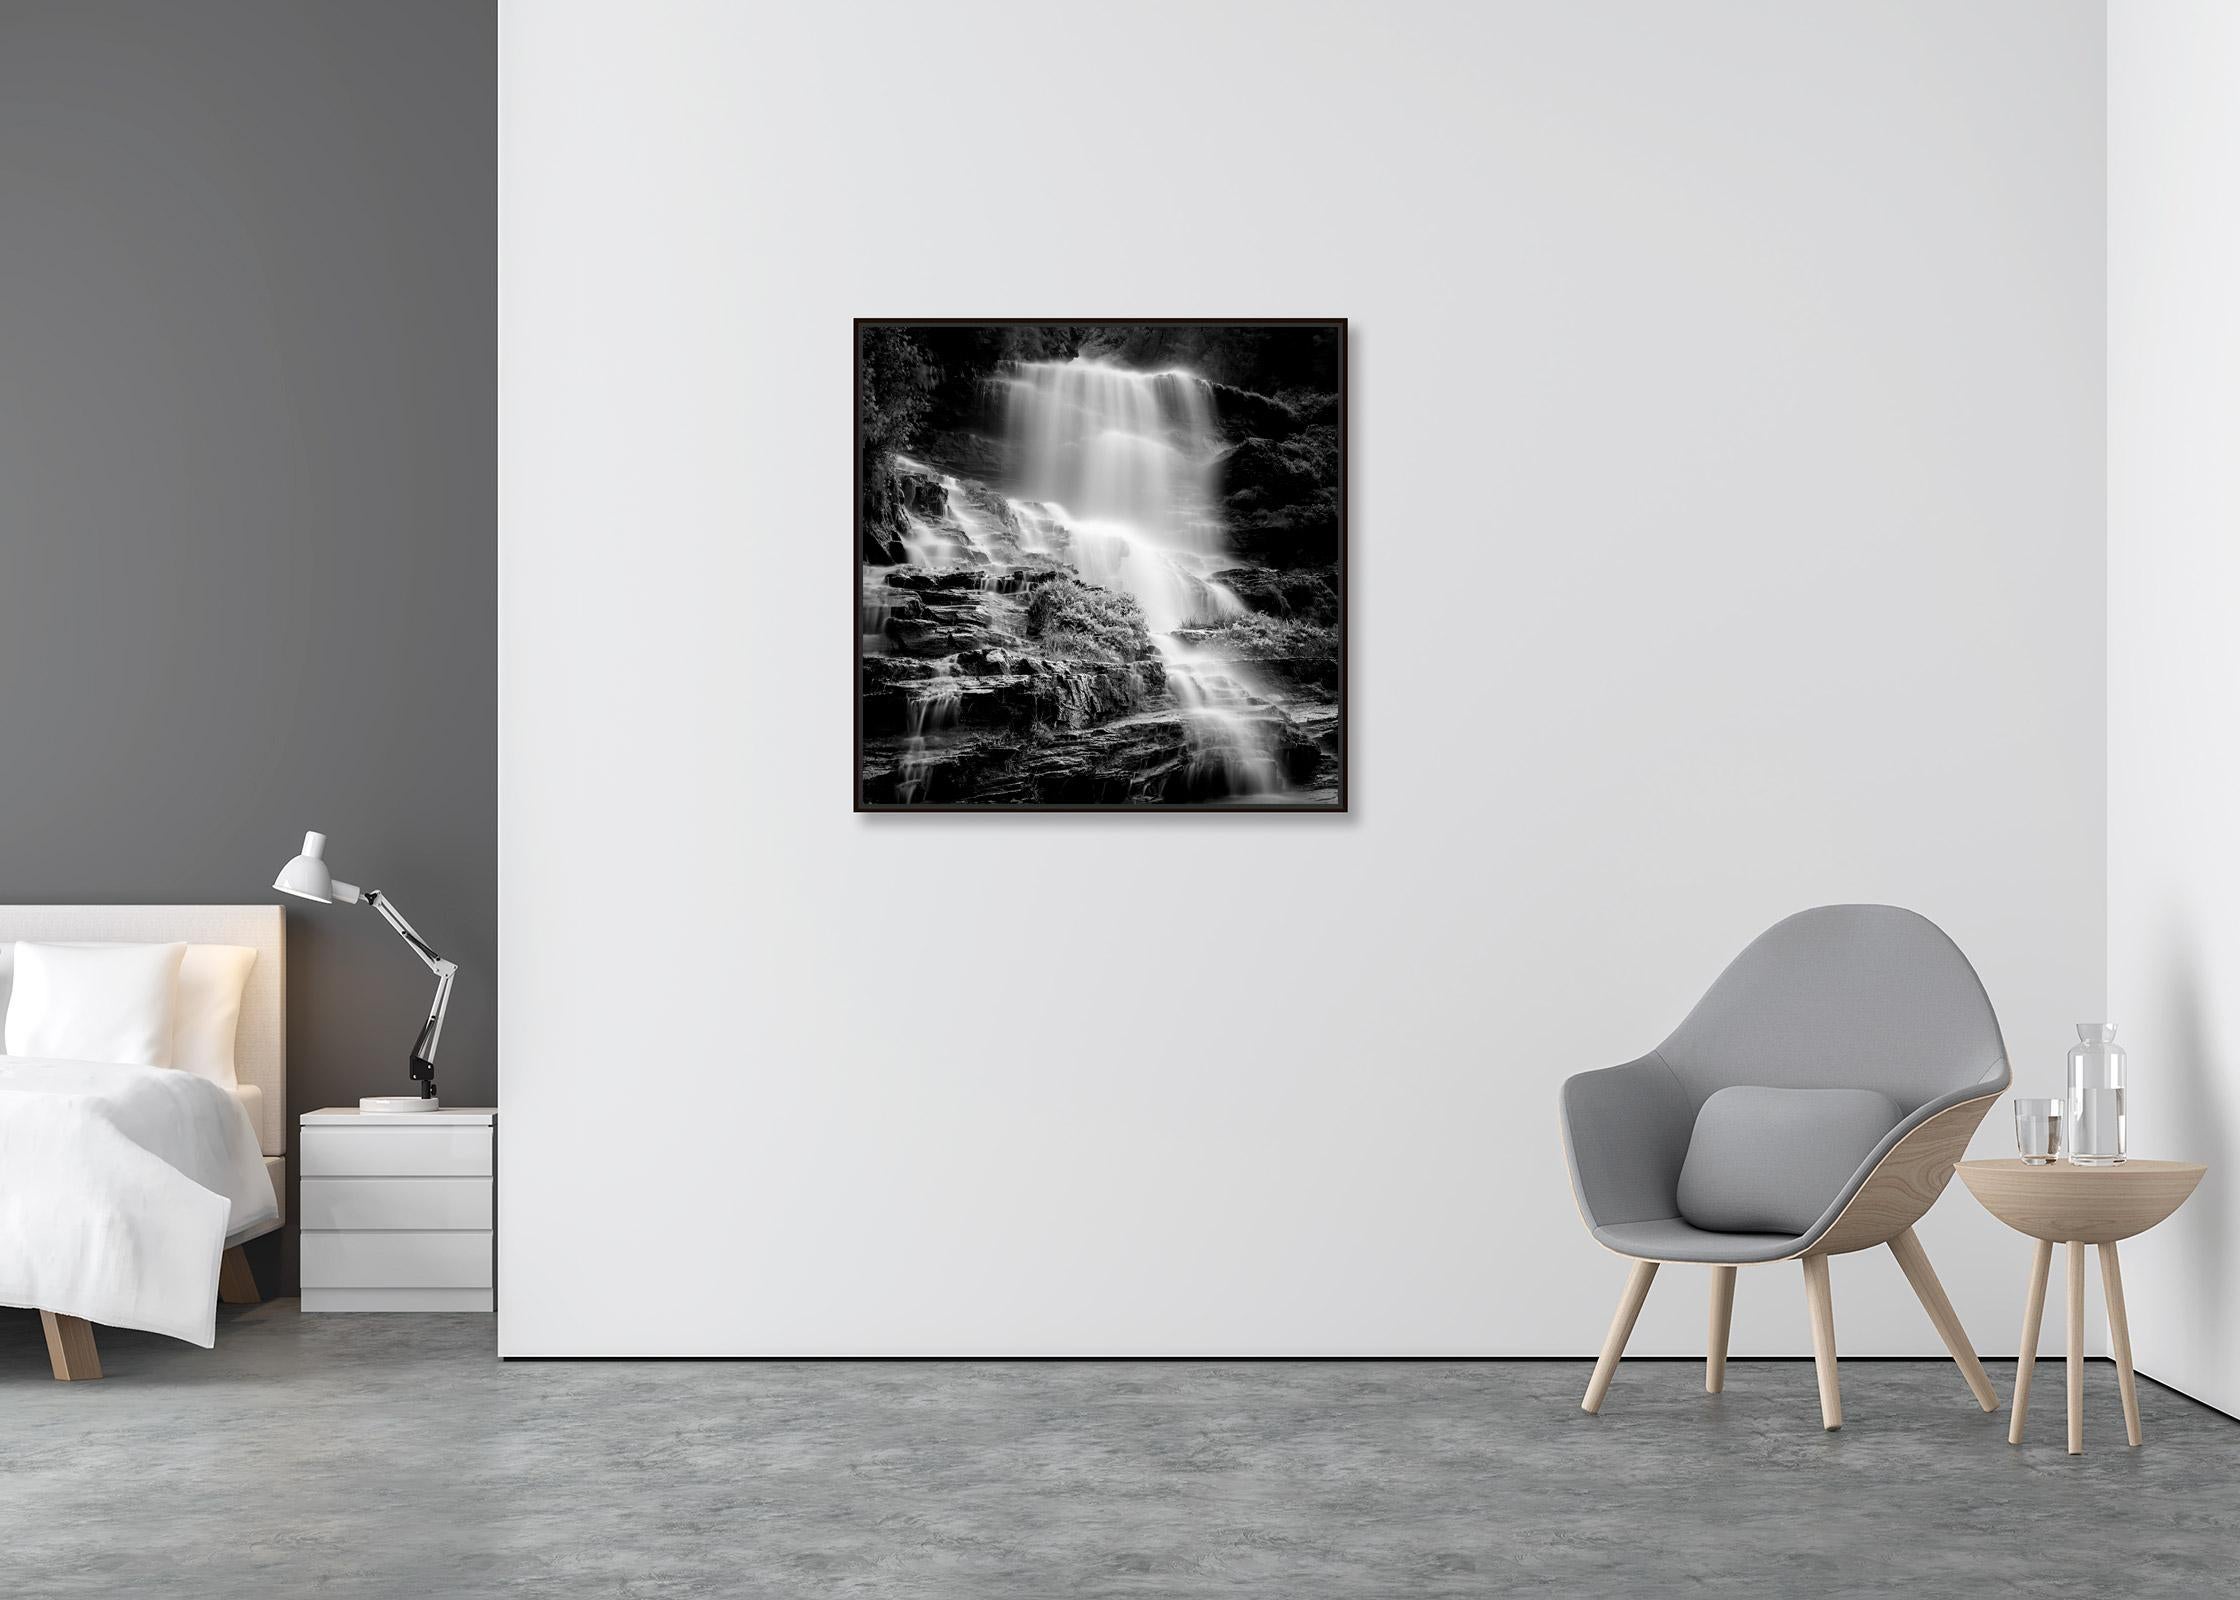 Klockelefall Waterfall, black and white art photography, waterscape, landscape  - Contemporary Photograph by Gerald Berghammer